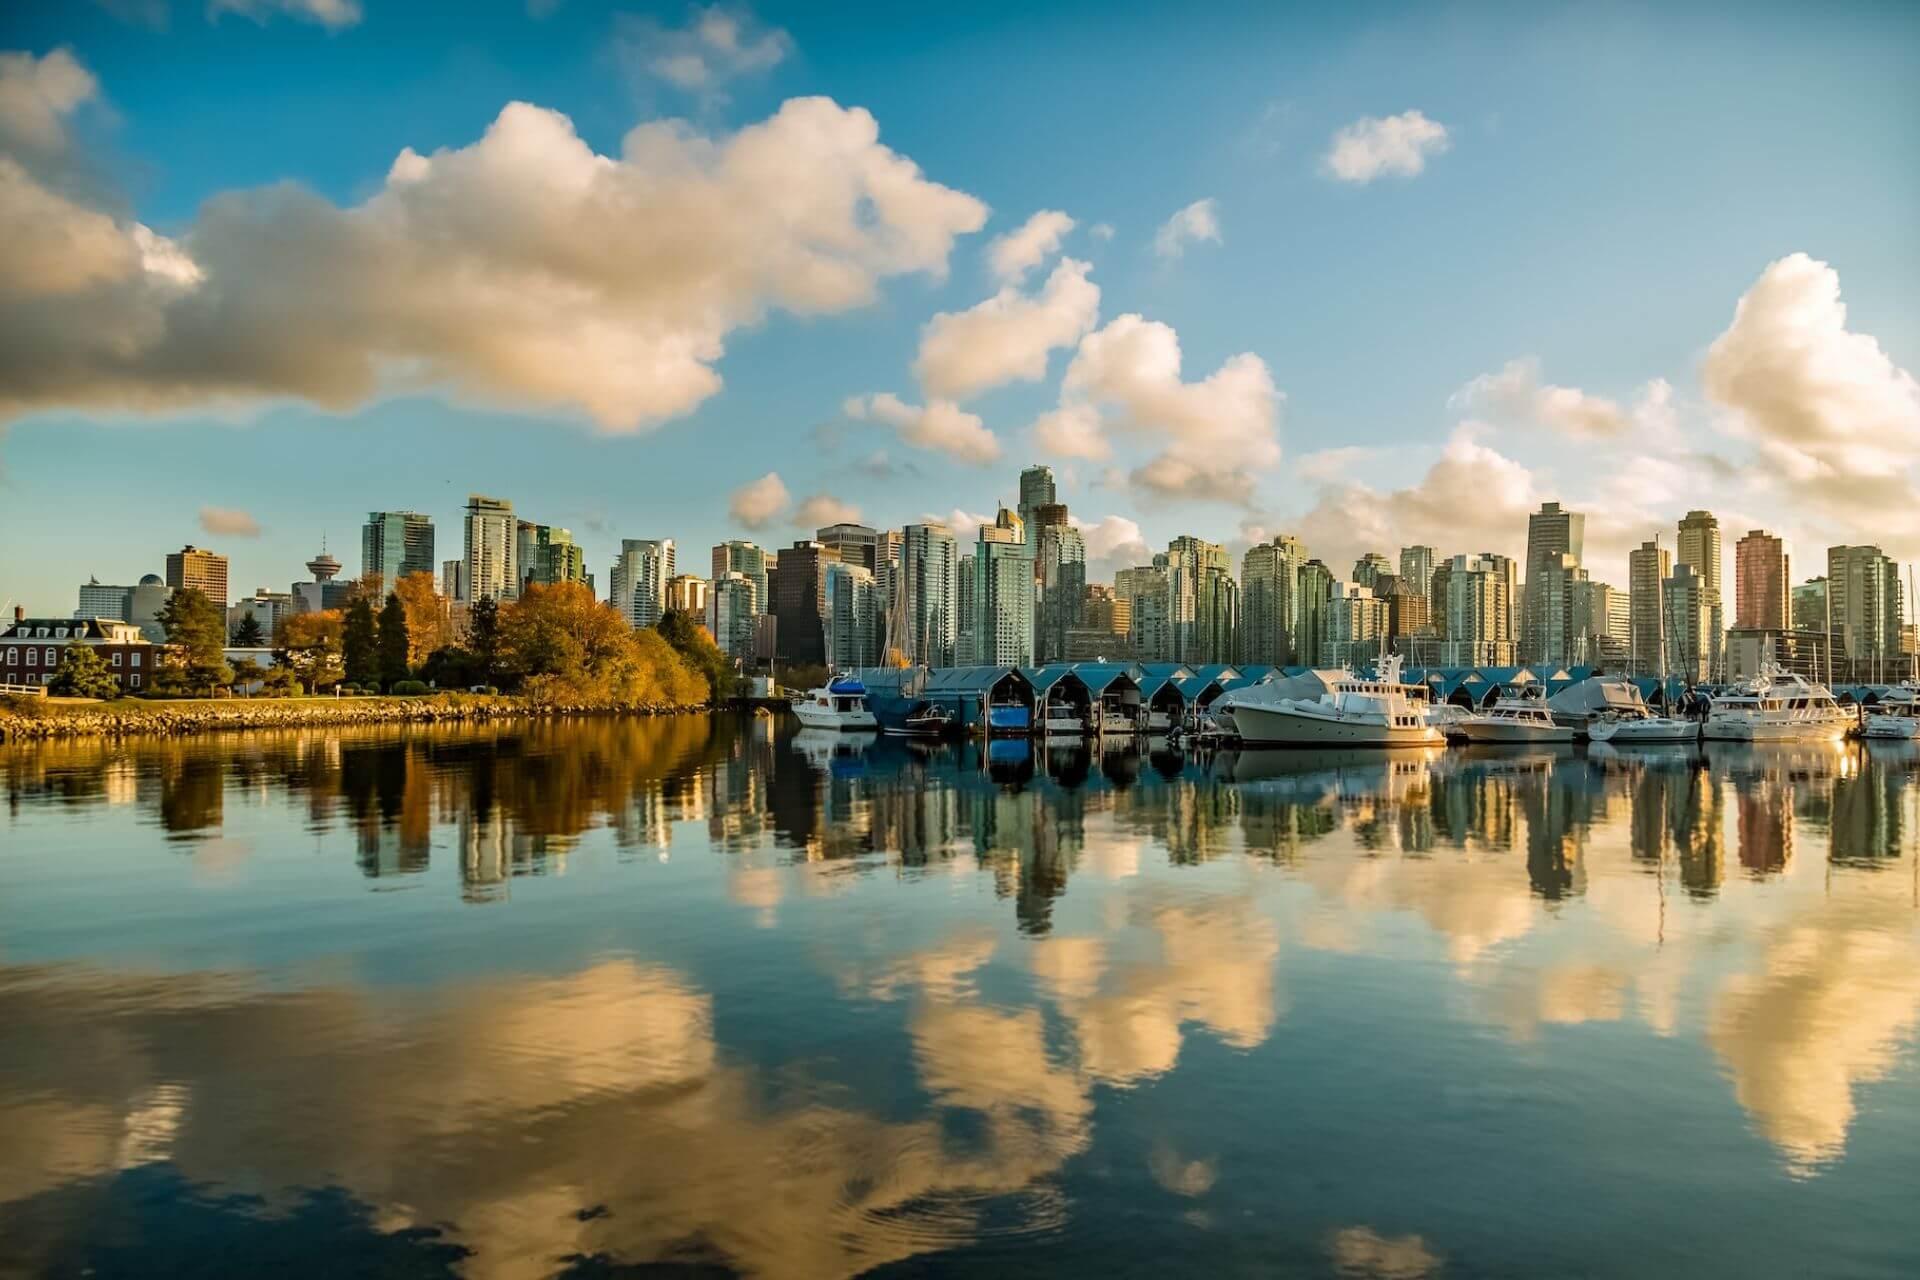 A view of the city of Vancouver surrounded by water, Canada